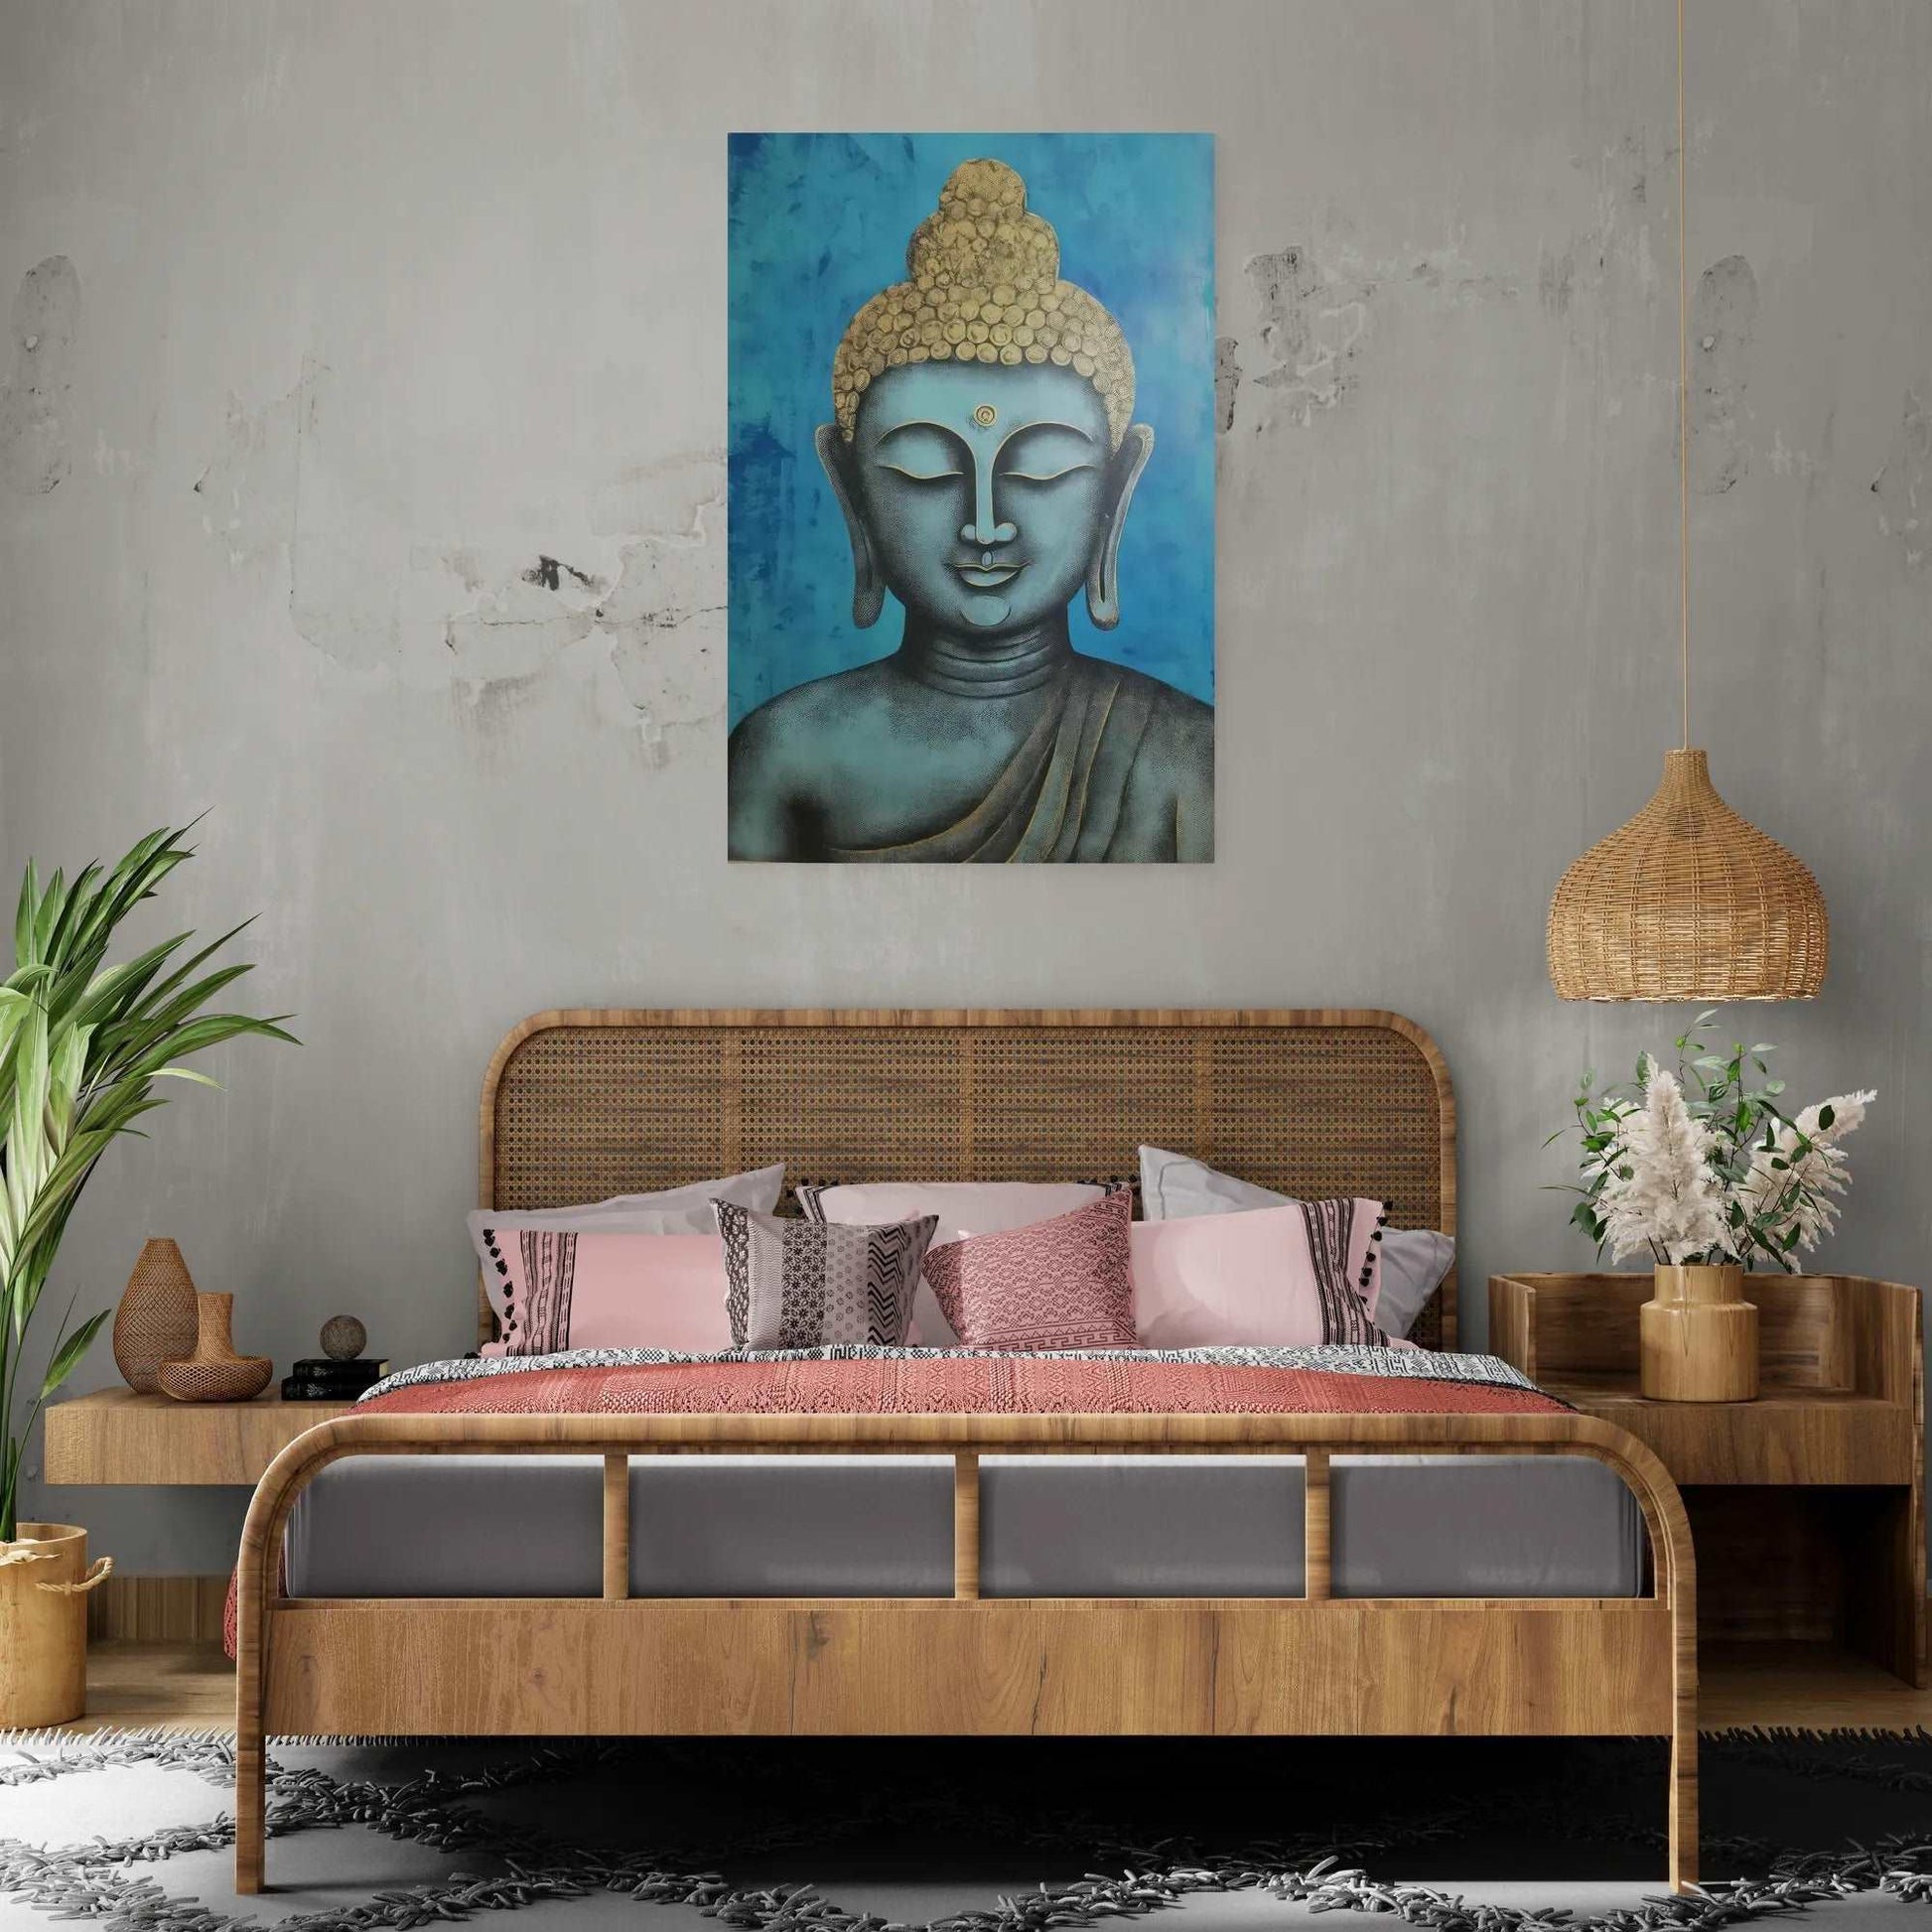 A cozy bedroom with rattan headboard and pink accents, illuminated by a pendant light, featuring a blue and gold Buddha head artwork.